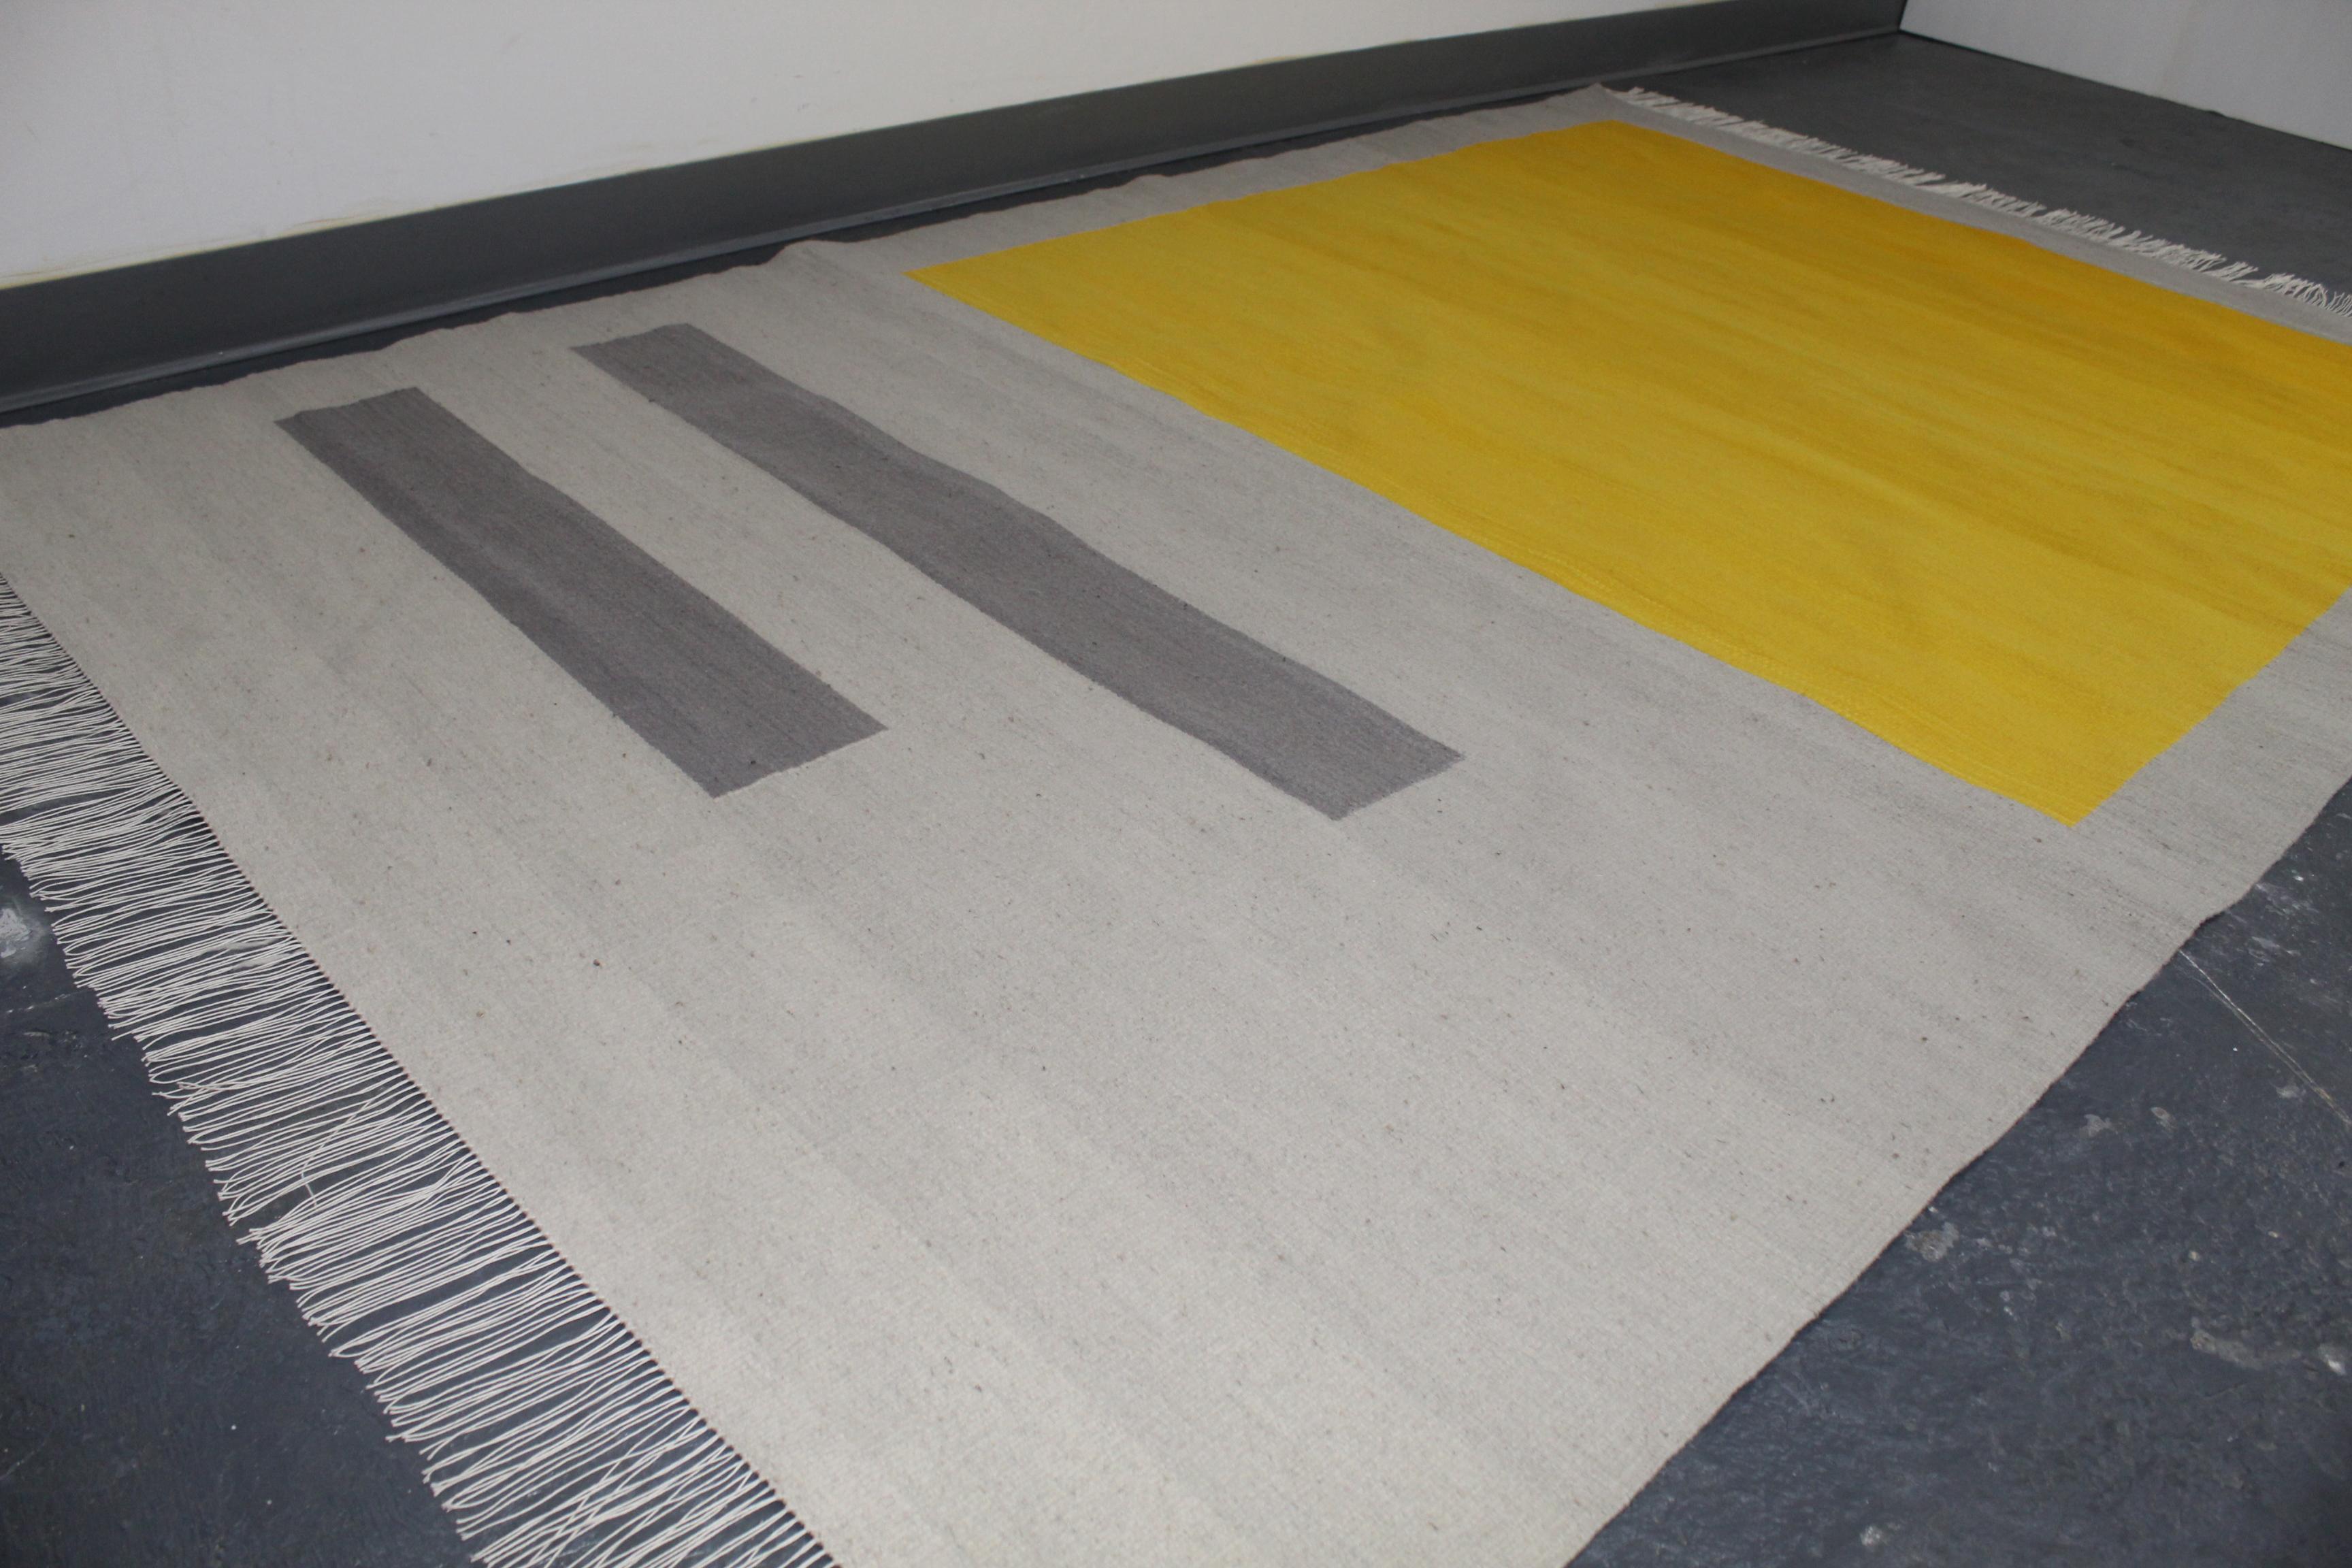 Hand-Woven Bespoke Yellow and Grey Wool Handwoven Rug or Kilim, Natural Dye For Sale